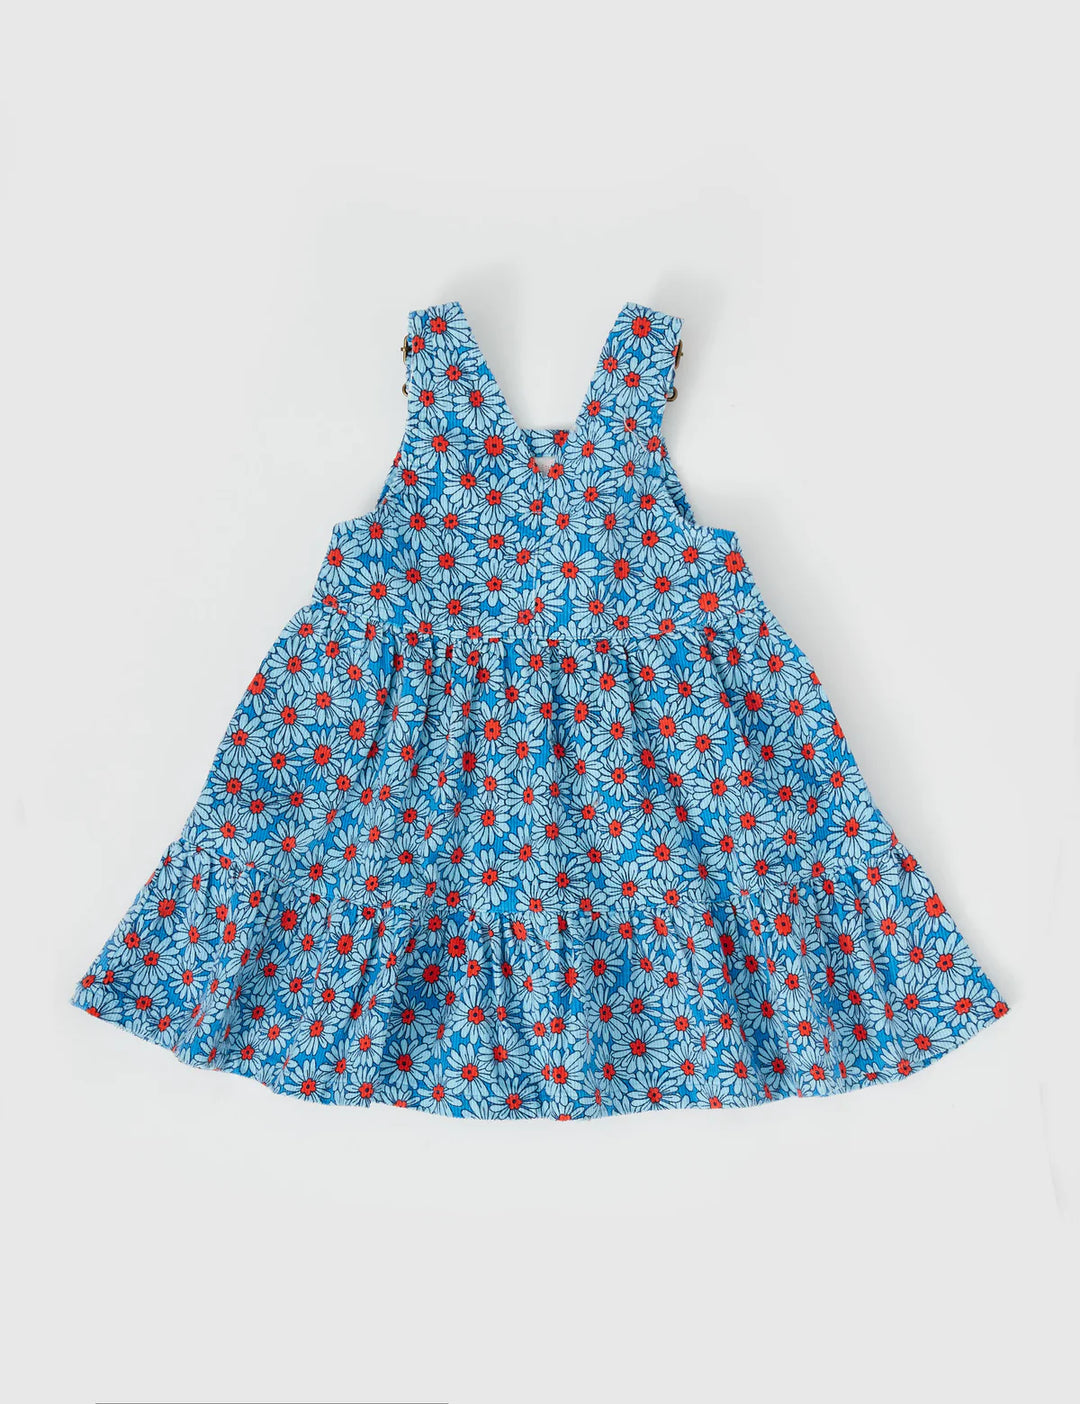 DIXIE DAISY TIERED CORDUROY PINAFORE DRESS - JL & CO. boutique 